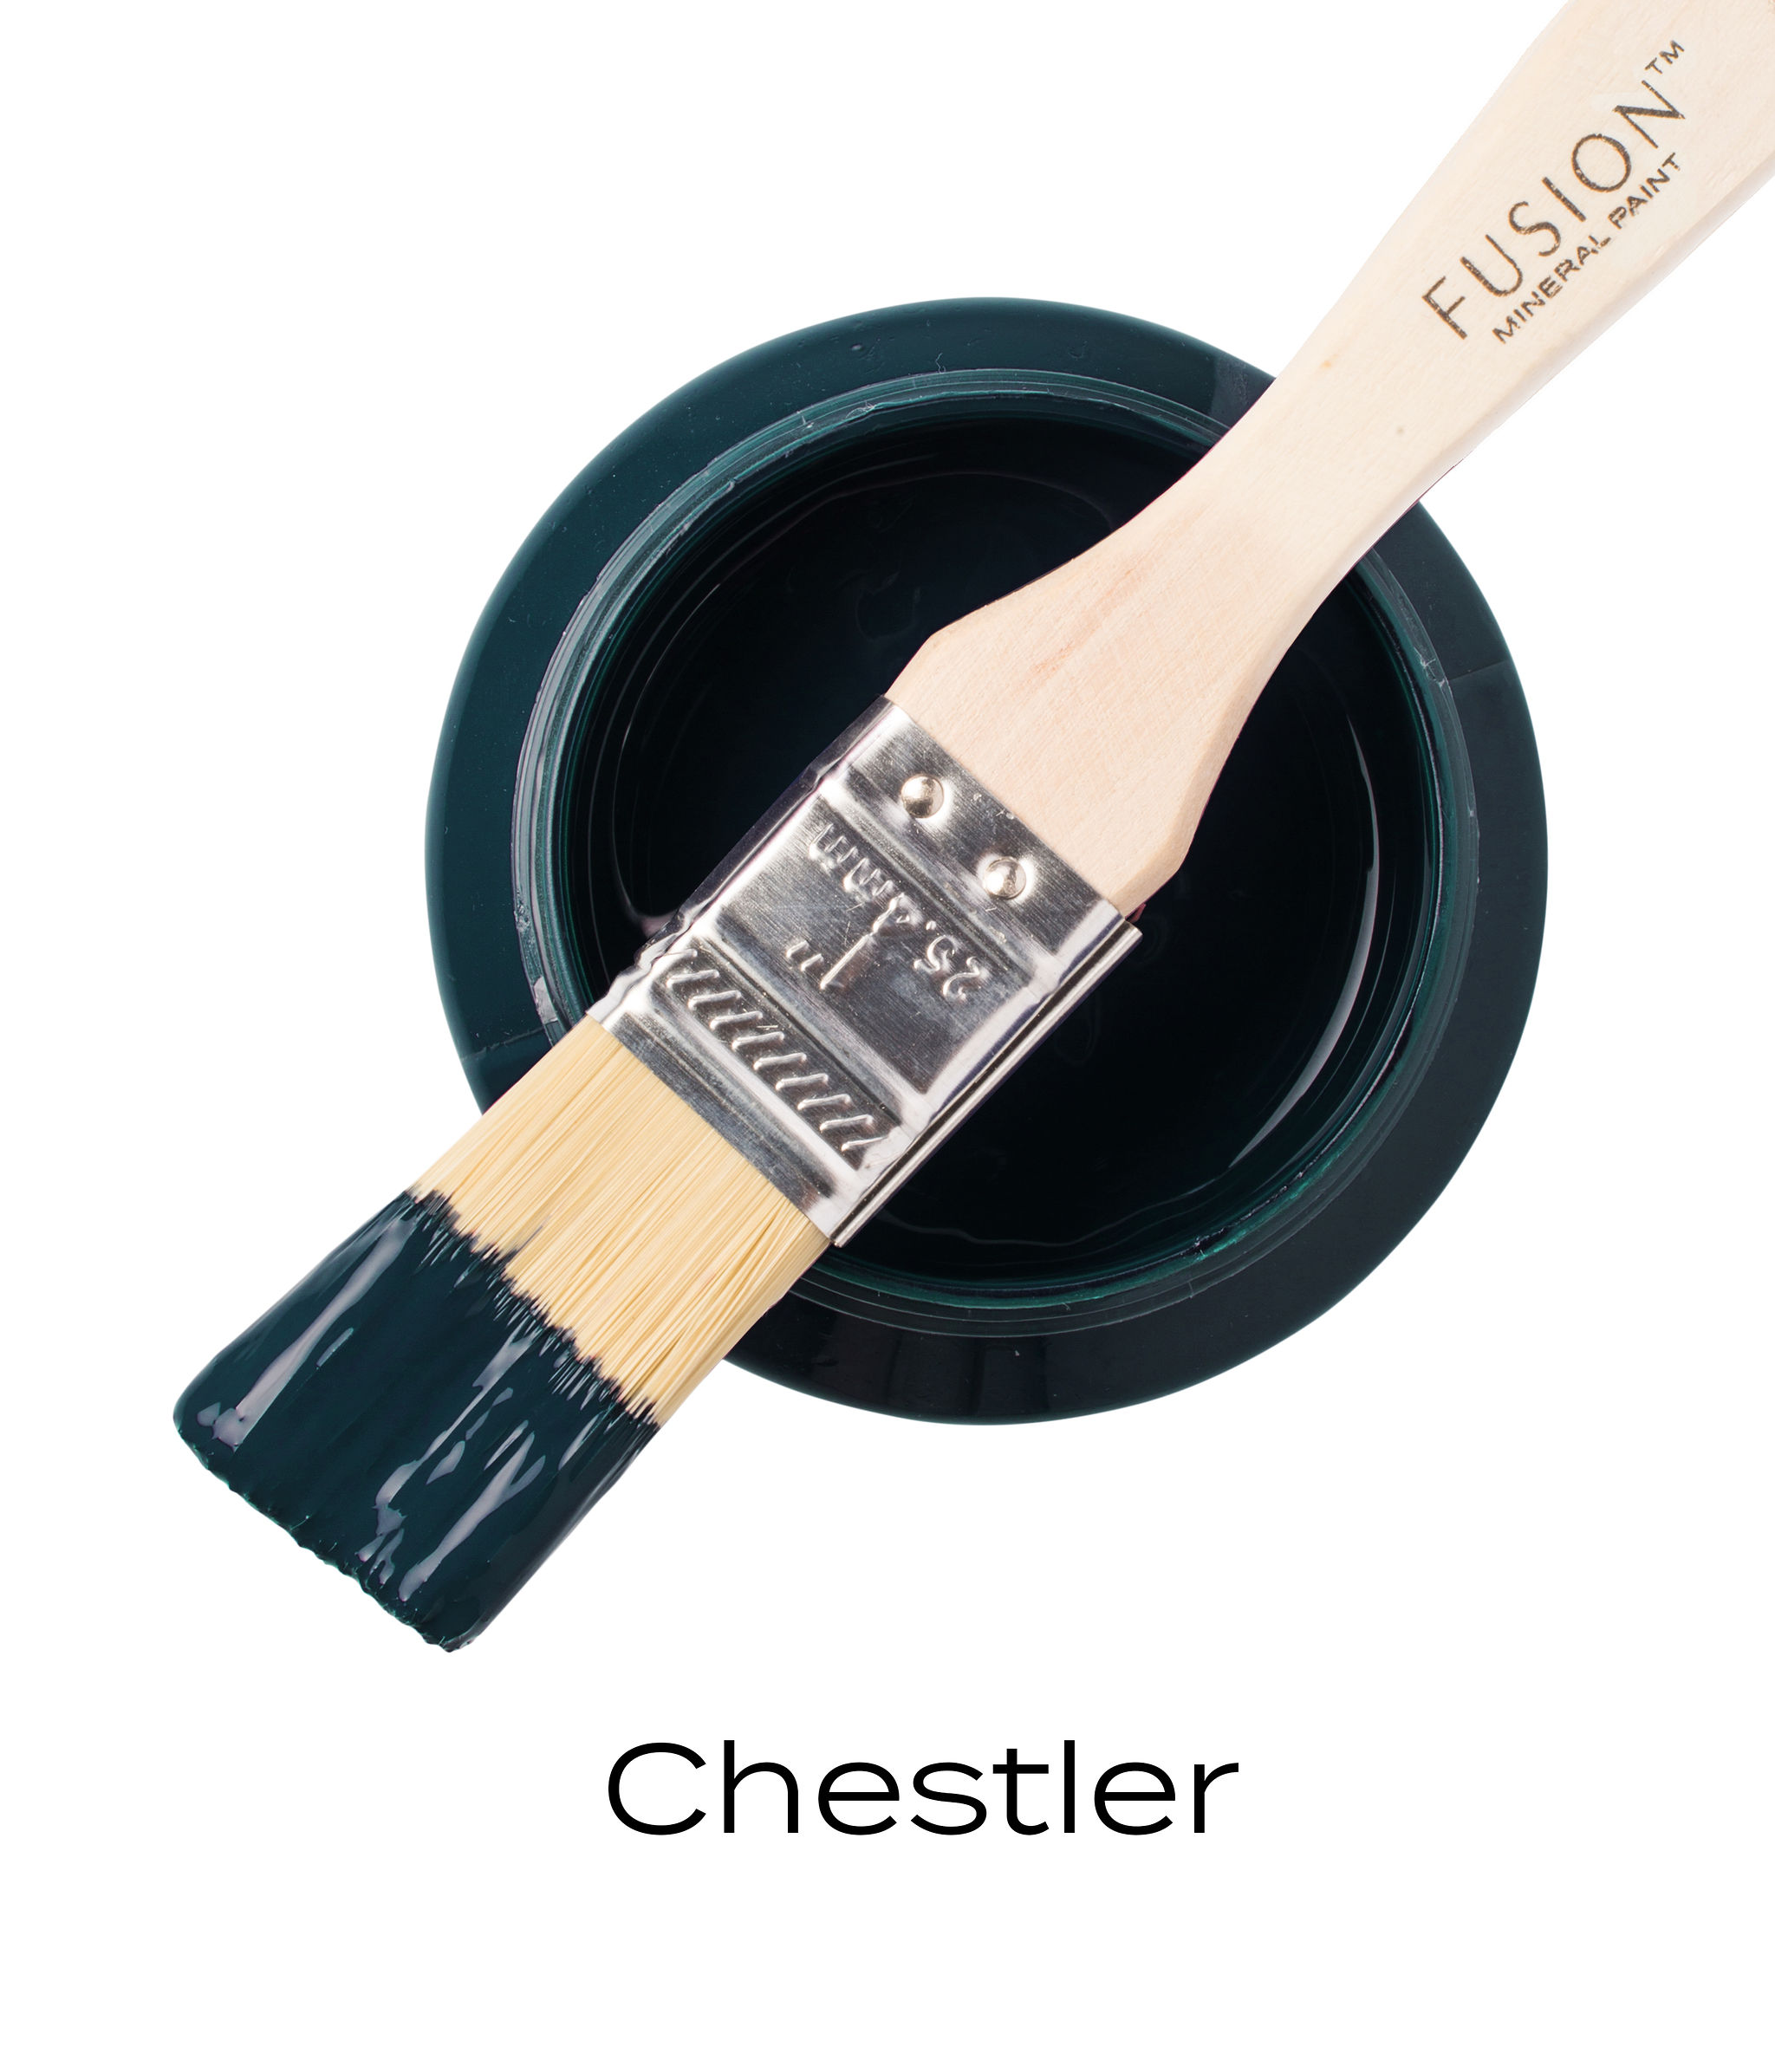 Chestler Fusion Mineral Paint Goed Gestyled